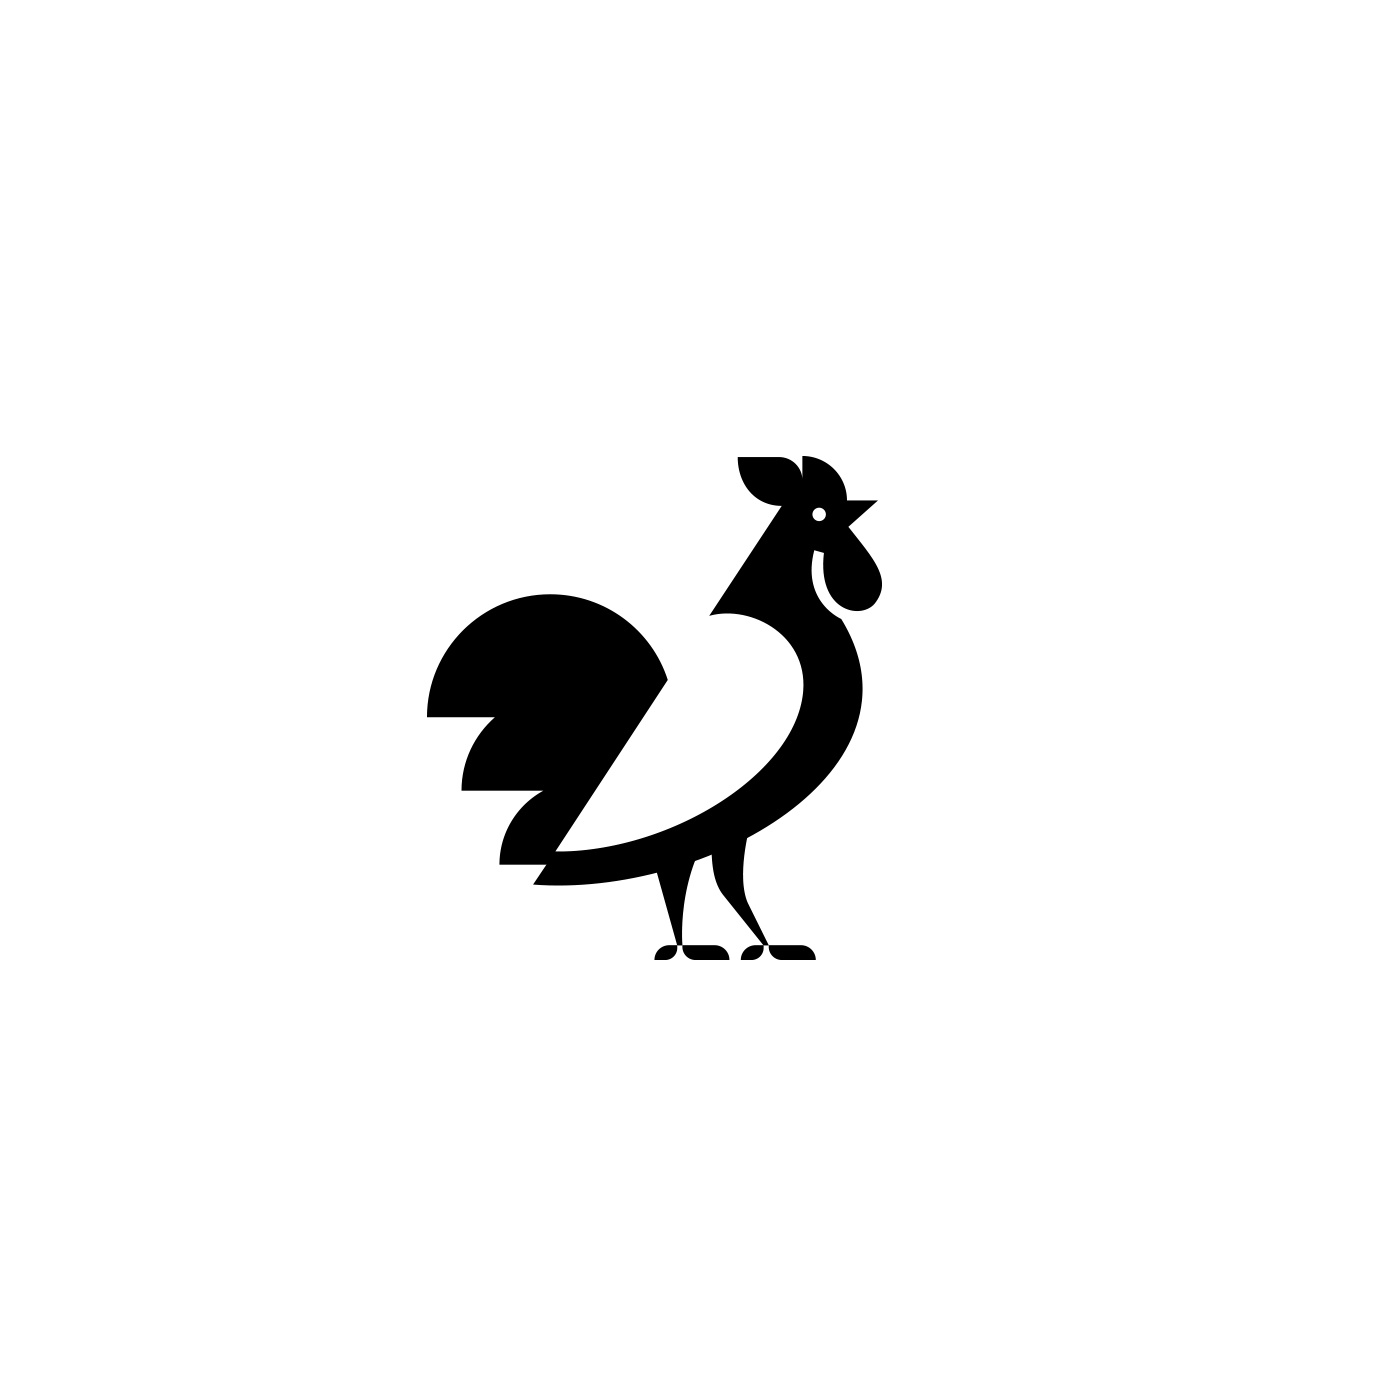 Morning Rooster by Alex Seciu on Dribbble